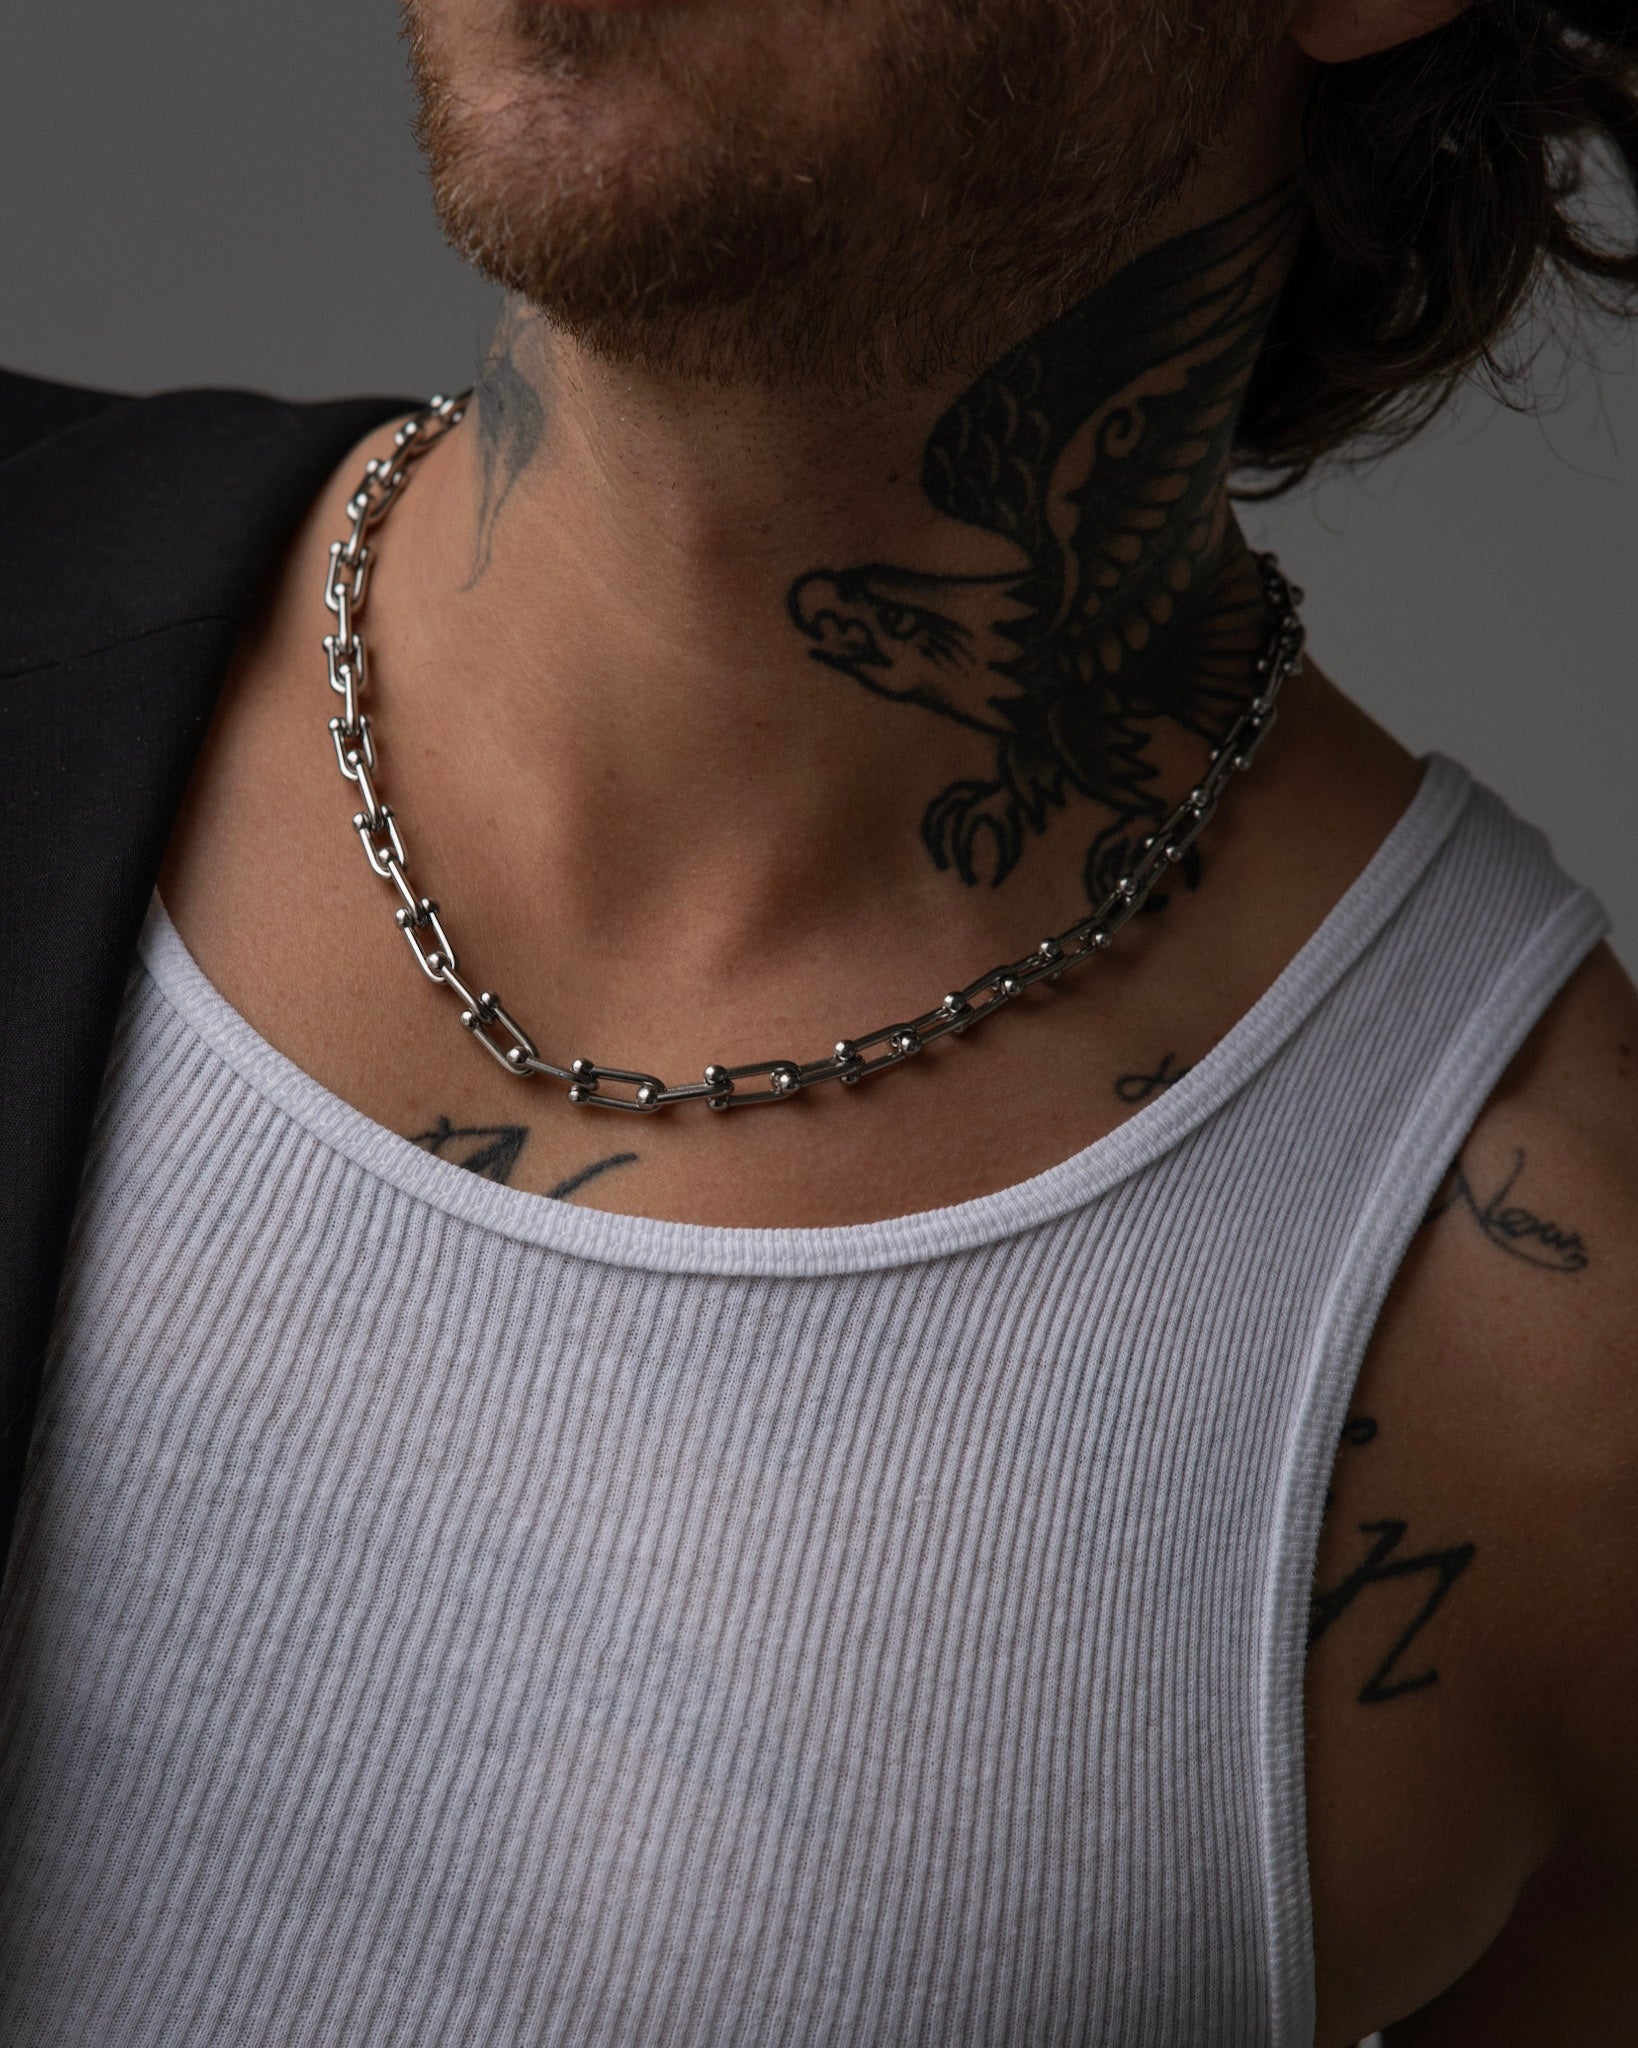 Sepik men's necklace by Five Jwlry, designed with a 5mm U-shape horseshoe buckle chain in silver-colored, water-resistant 316L stainless steel. Available in sizes 45cm and 50cm. Hypoallergenic with a 2-year warranty.